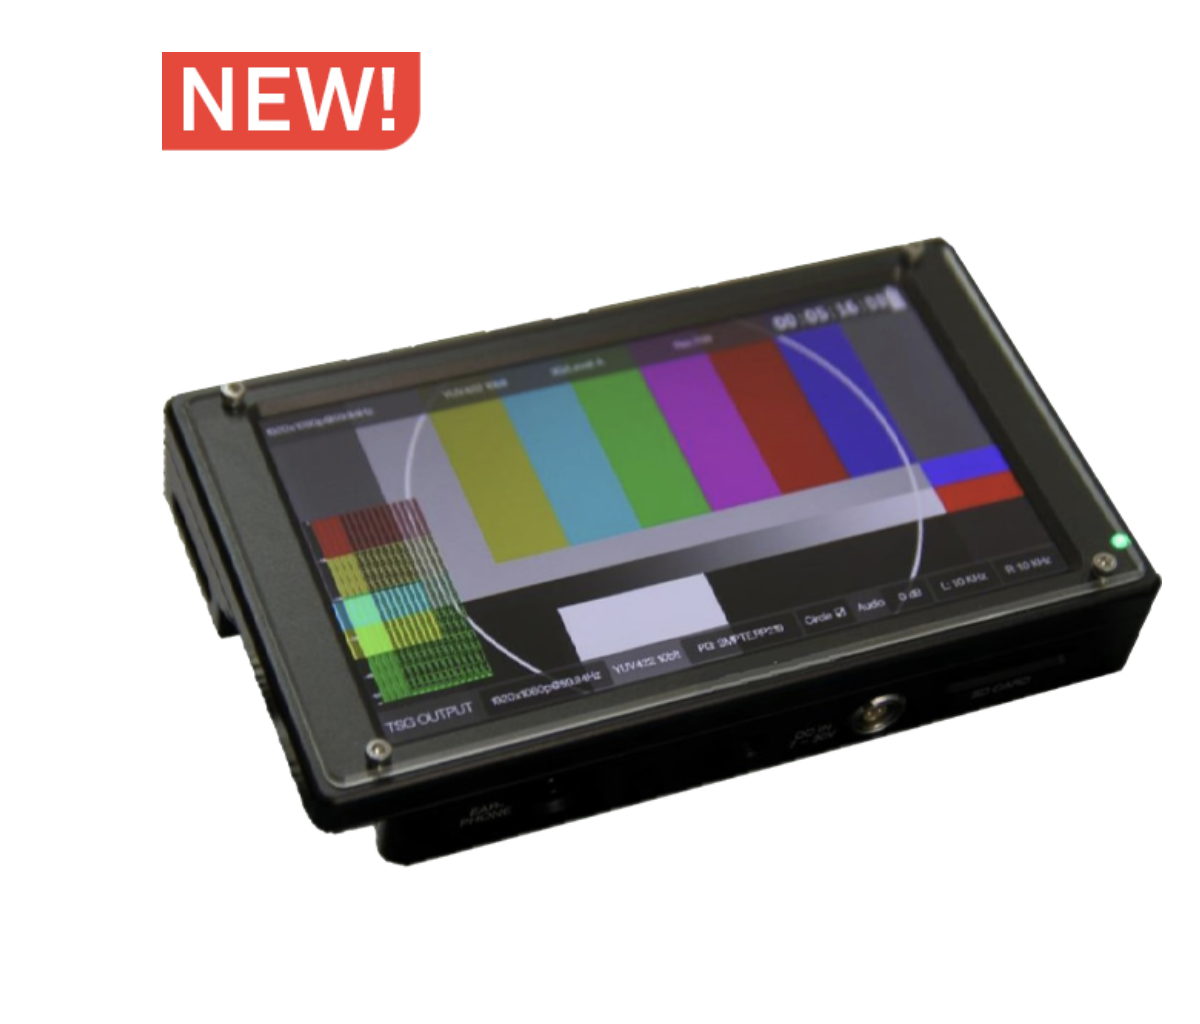 The PROTECH HDSG-500: The Ultimate 2-in-1 HD Video Monitor and Test Pattern Generator